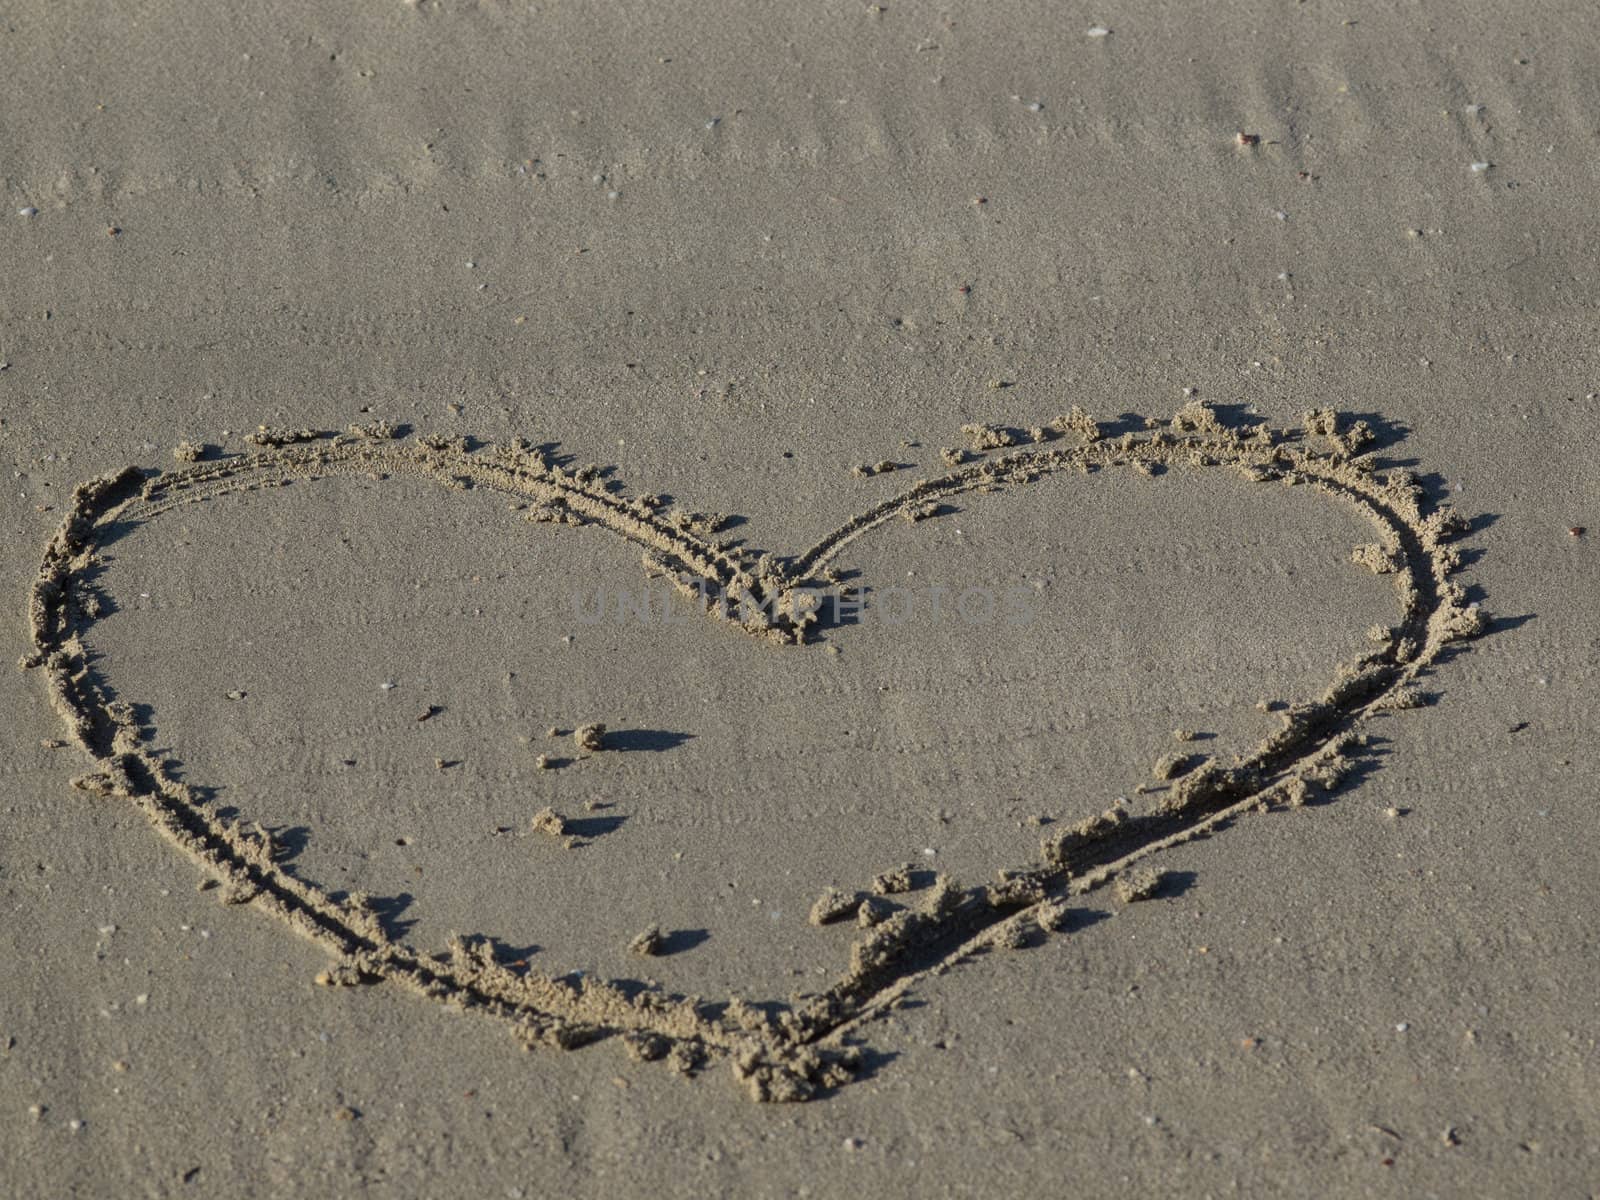 A heart shape drawn in the sand